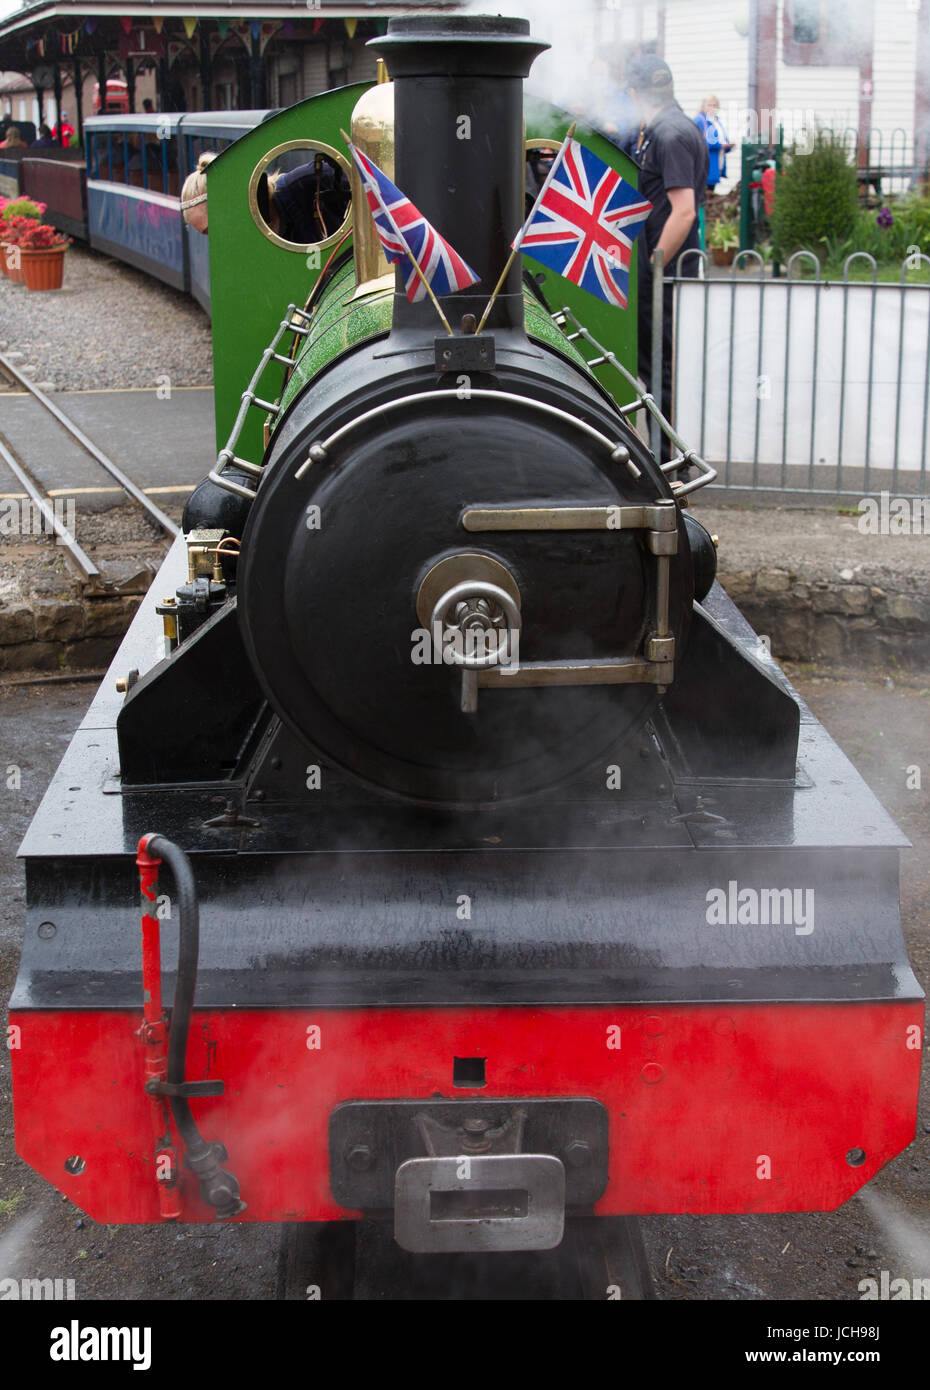 Ravenglass and Eskdale Railway Steam Engine River Irt stands on the turntable at Ravenglass Station. Union Jack Flags are displayed. Stock Photo